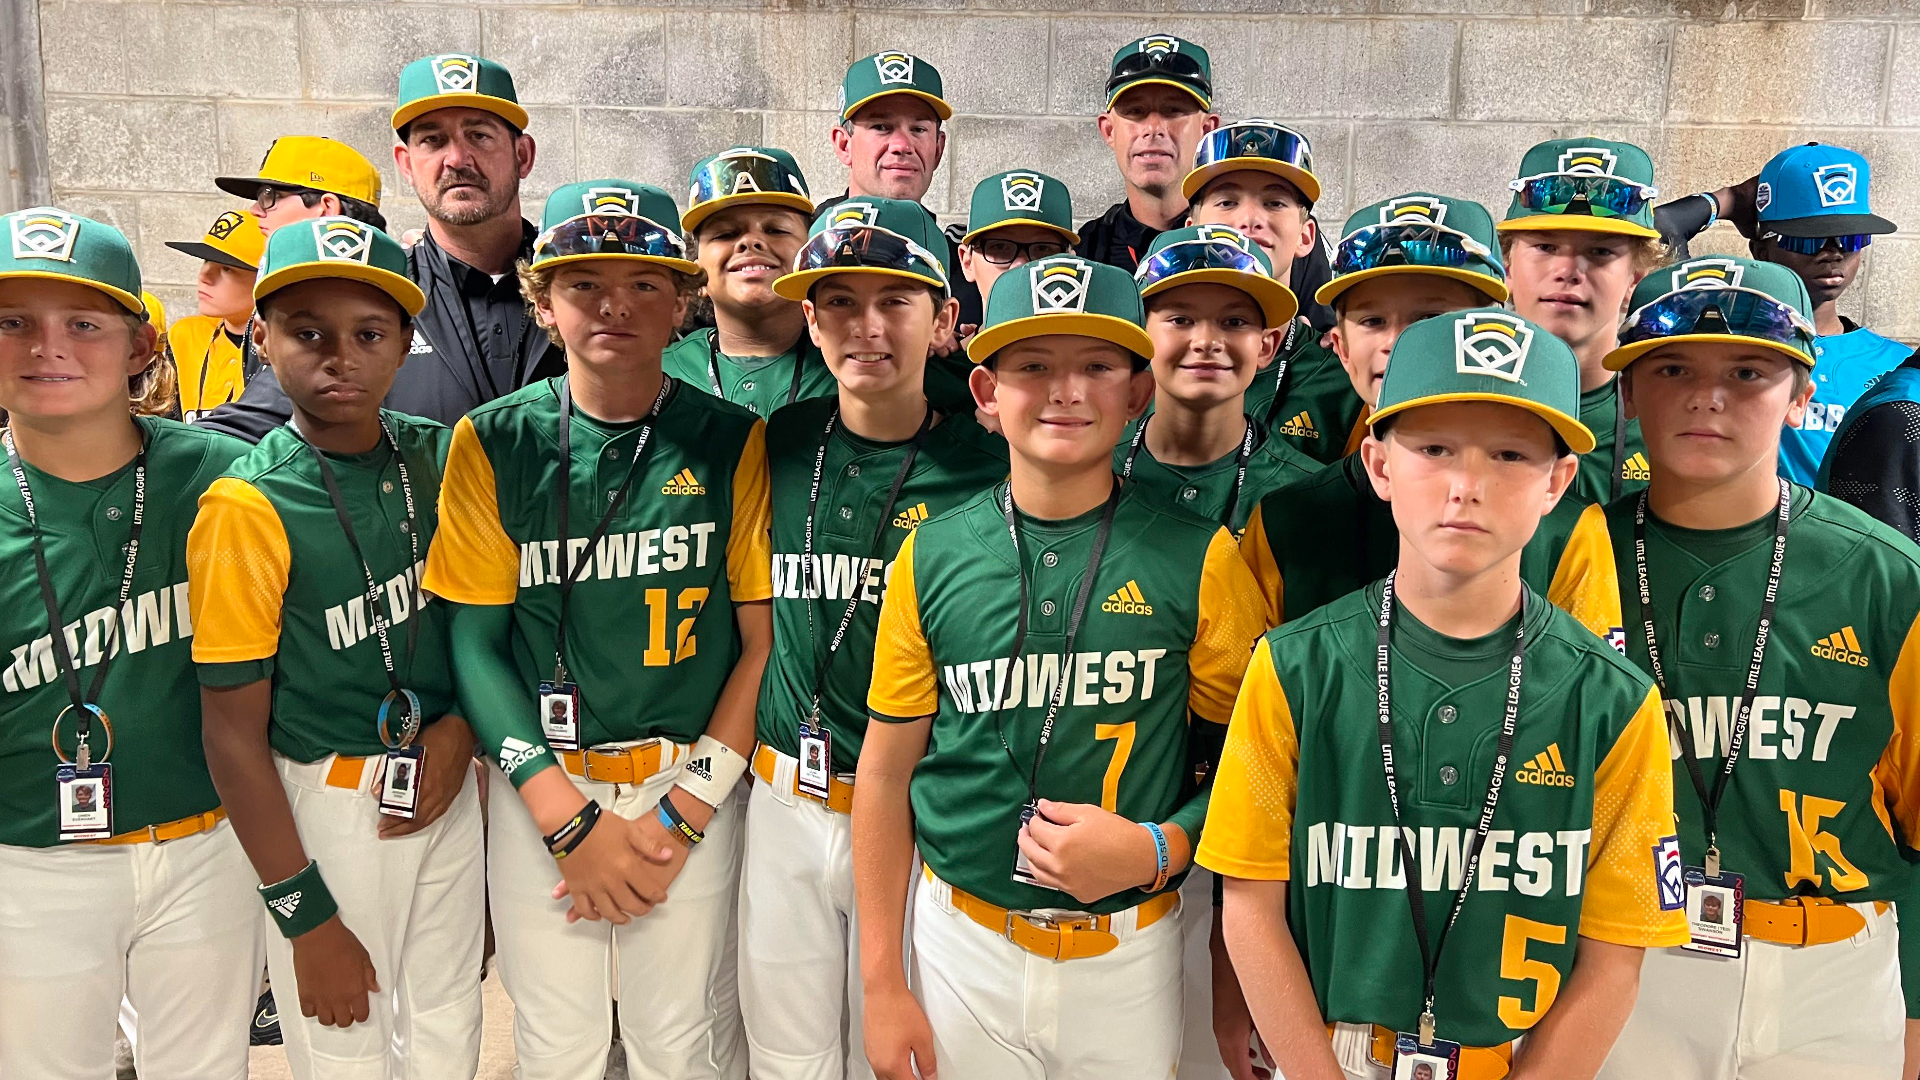 Hagerstown, Indiana, is playing in the 2022 Little League World Series